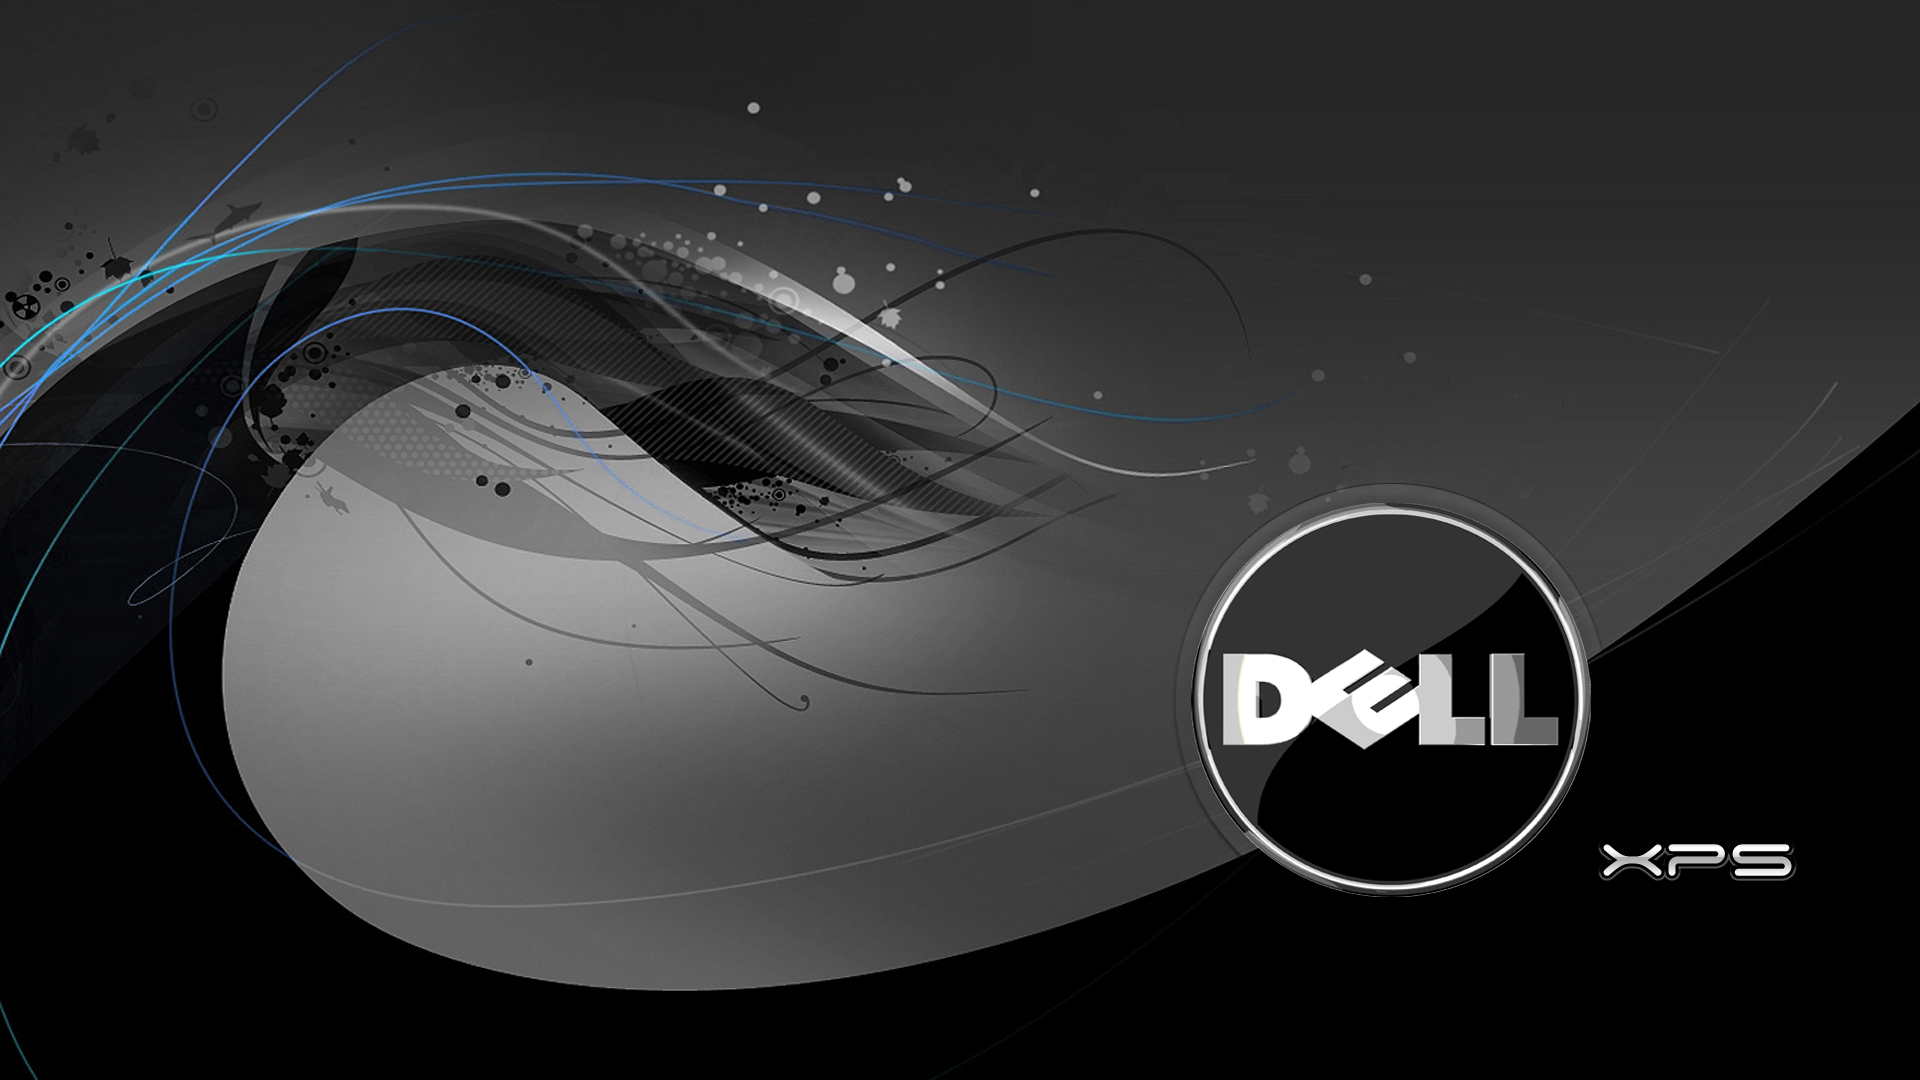 HD Dell Background Wallpaper Image For